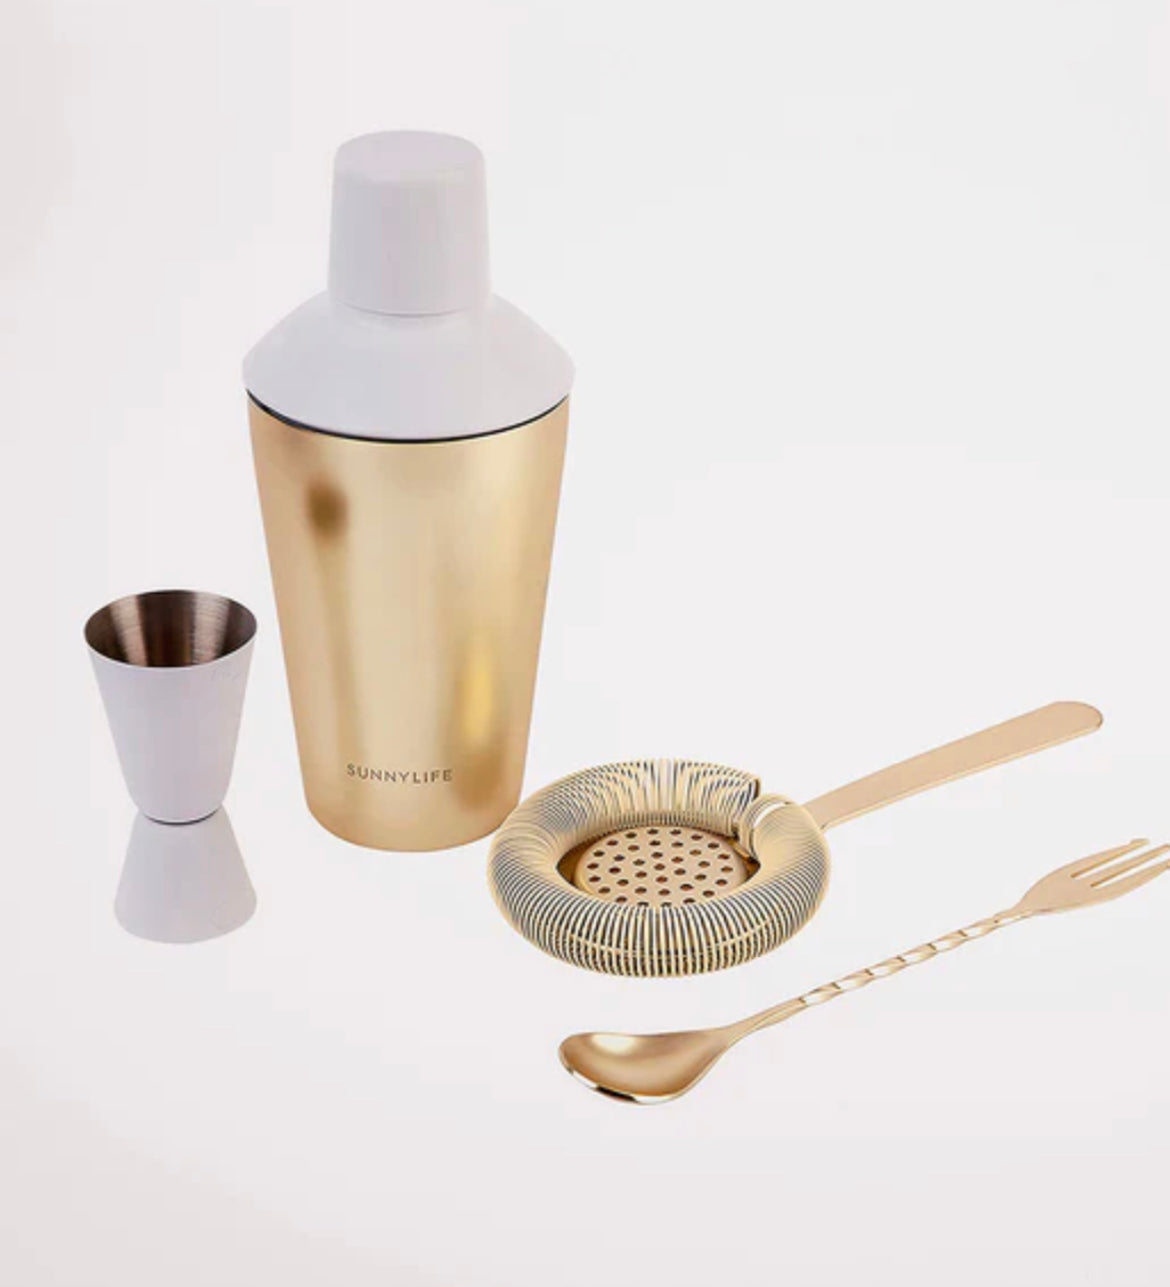 Sunny life Luxe Cocktail Shaker Set